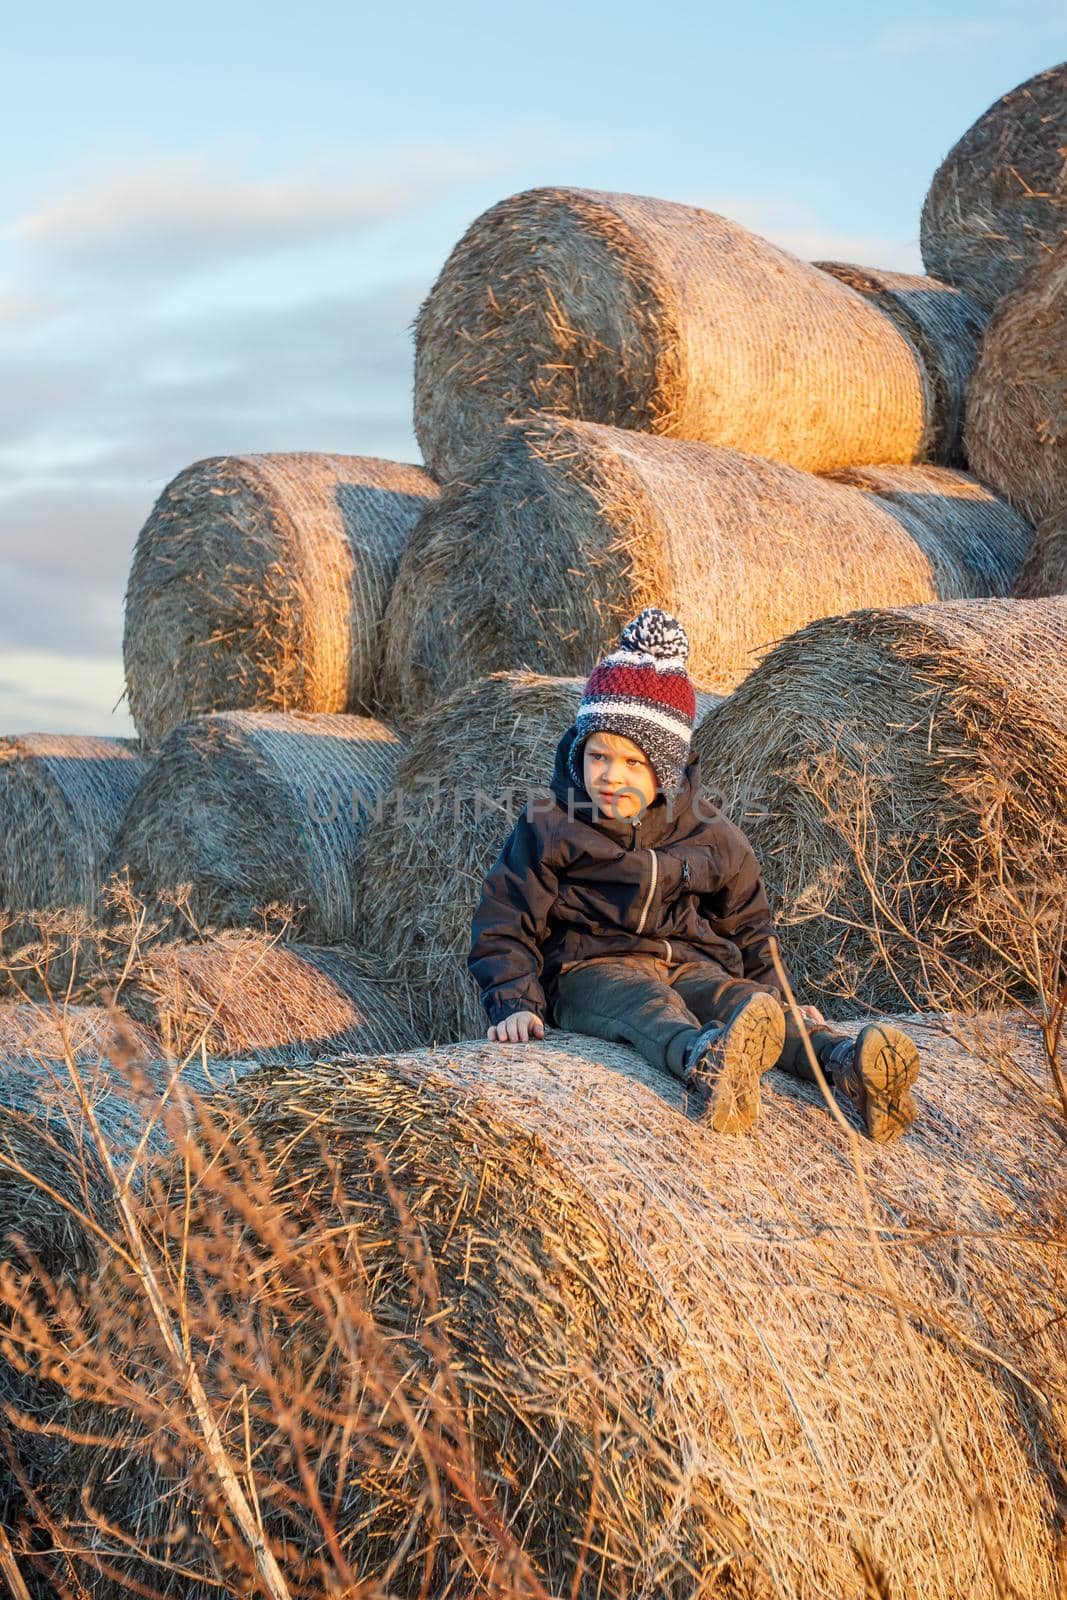 A cute little boy in autumn clothes and a knitted hat poses against a background of golden hay bales. Vertical photo.